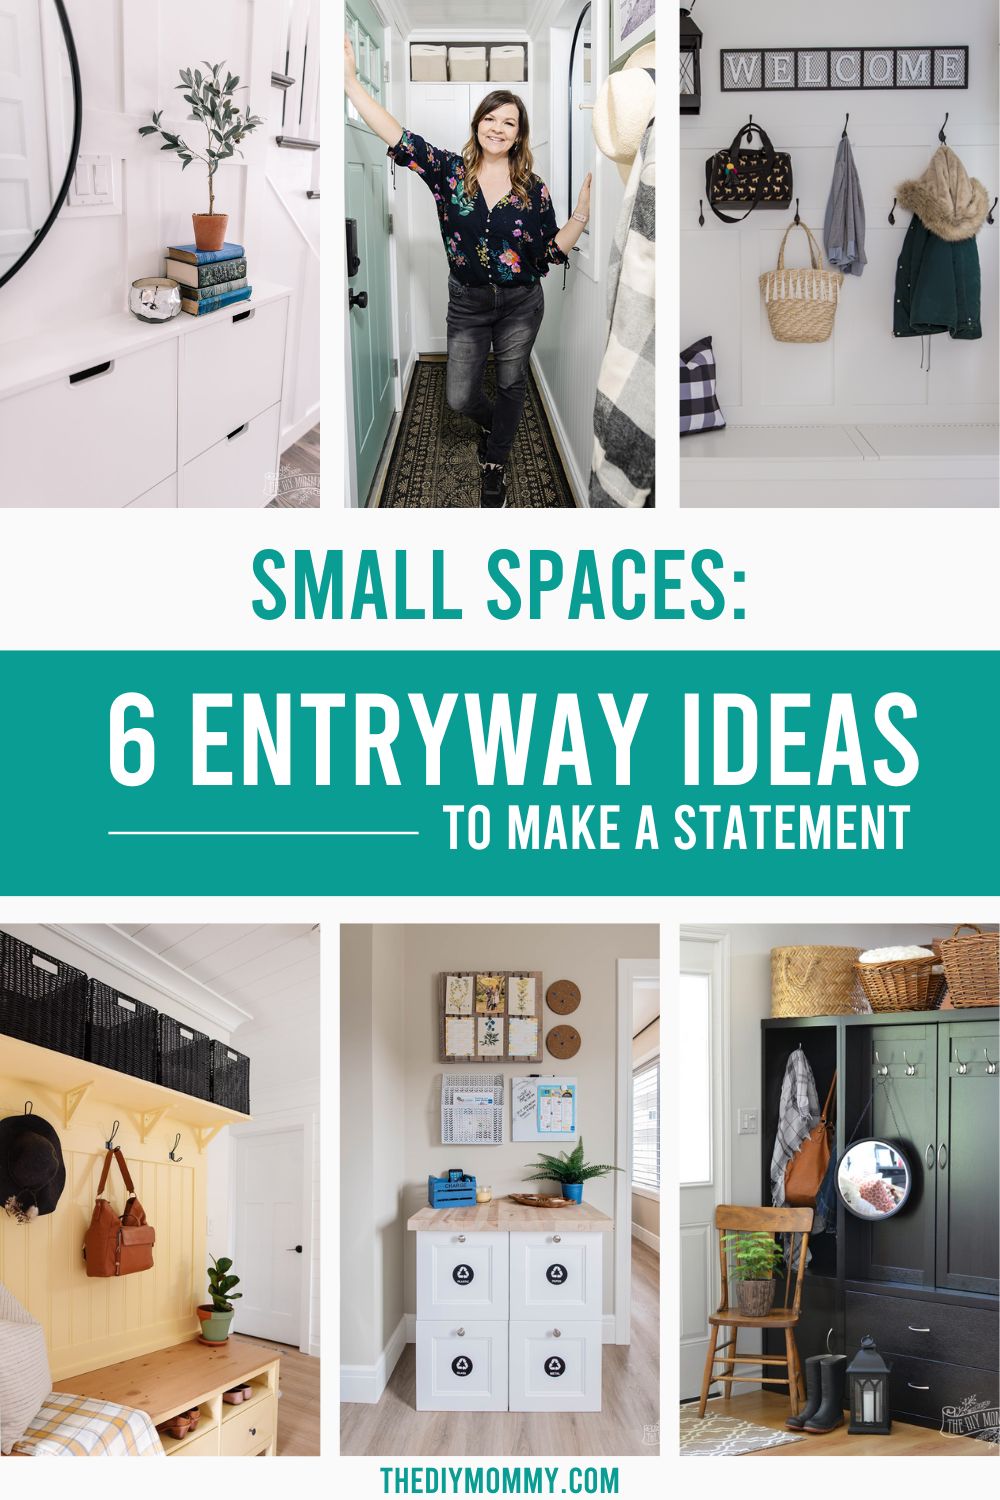 Small Spaces: 6 Entryway Ideas To Make A Statement